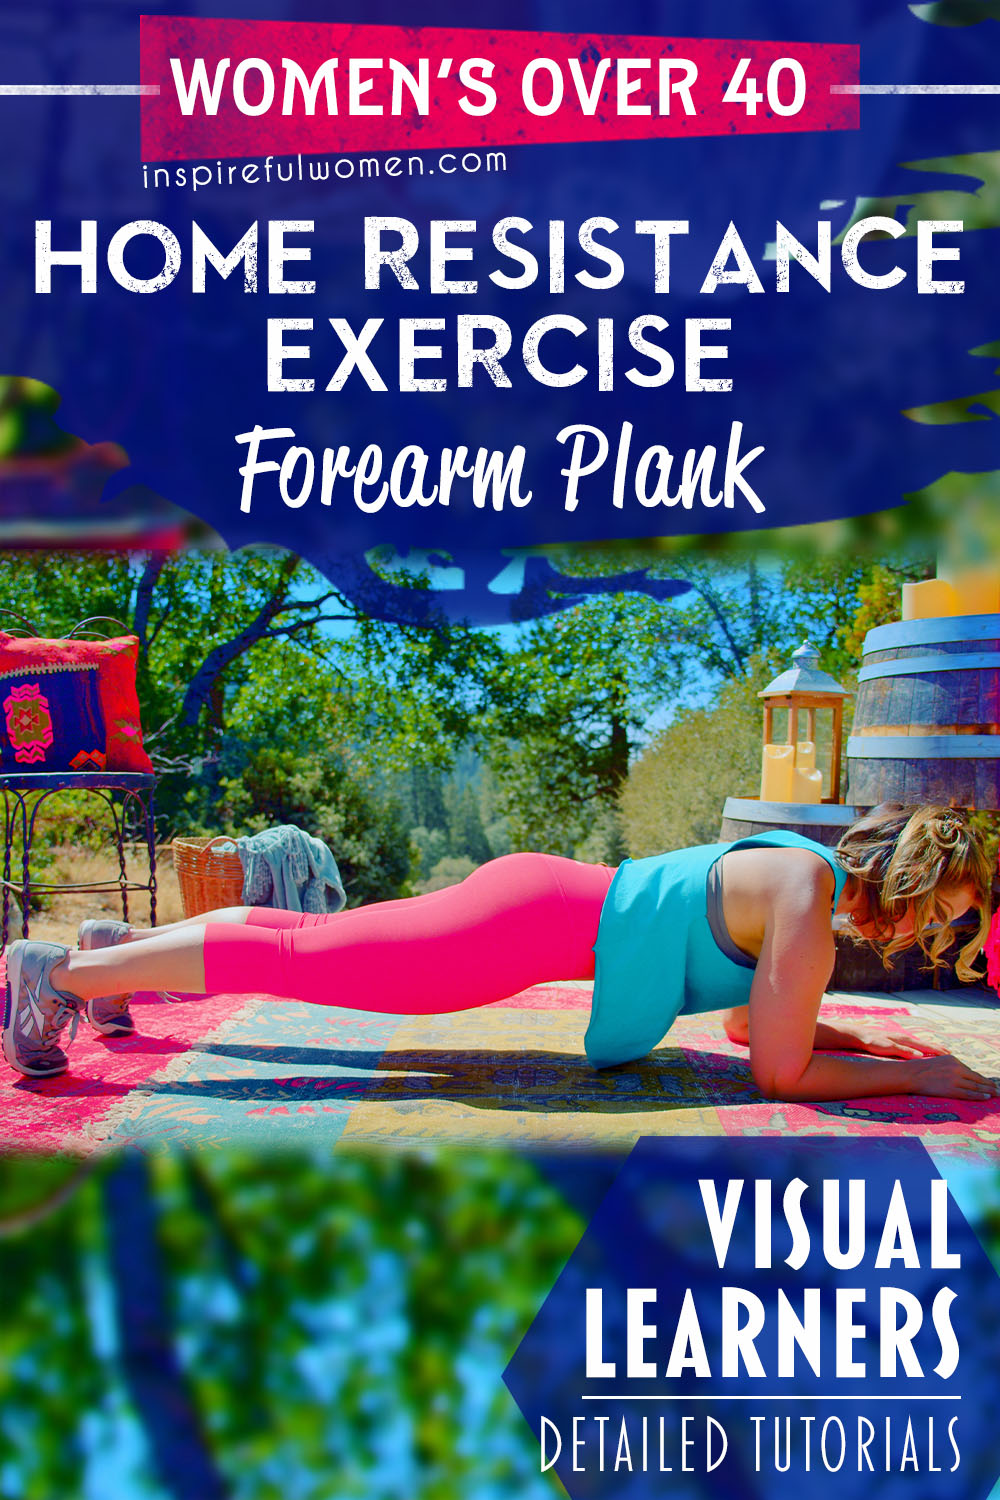 forearm-plank-beginner-variation-bodyweight-core-ab-exercise-at-home-women-over-40